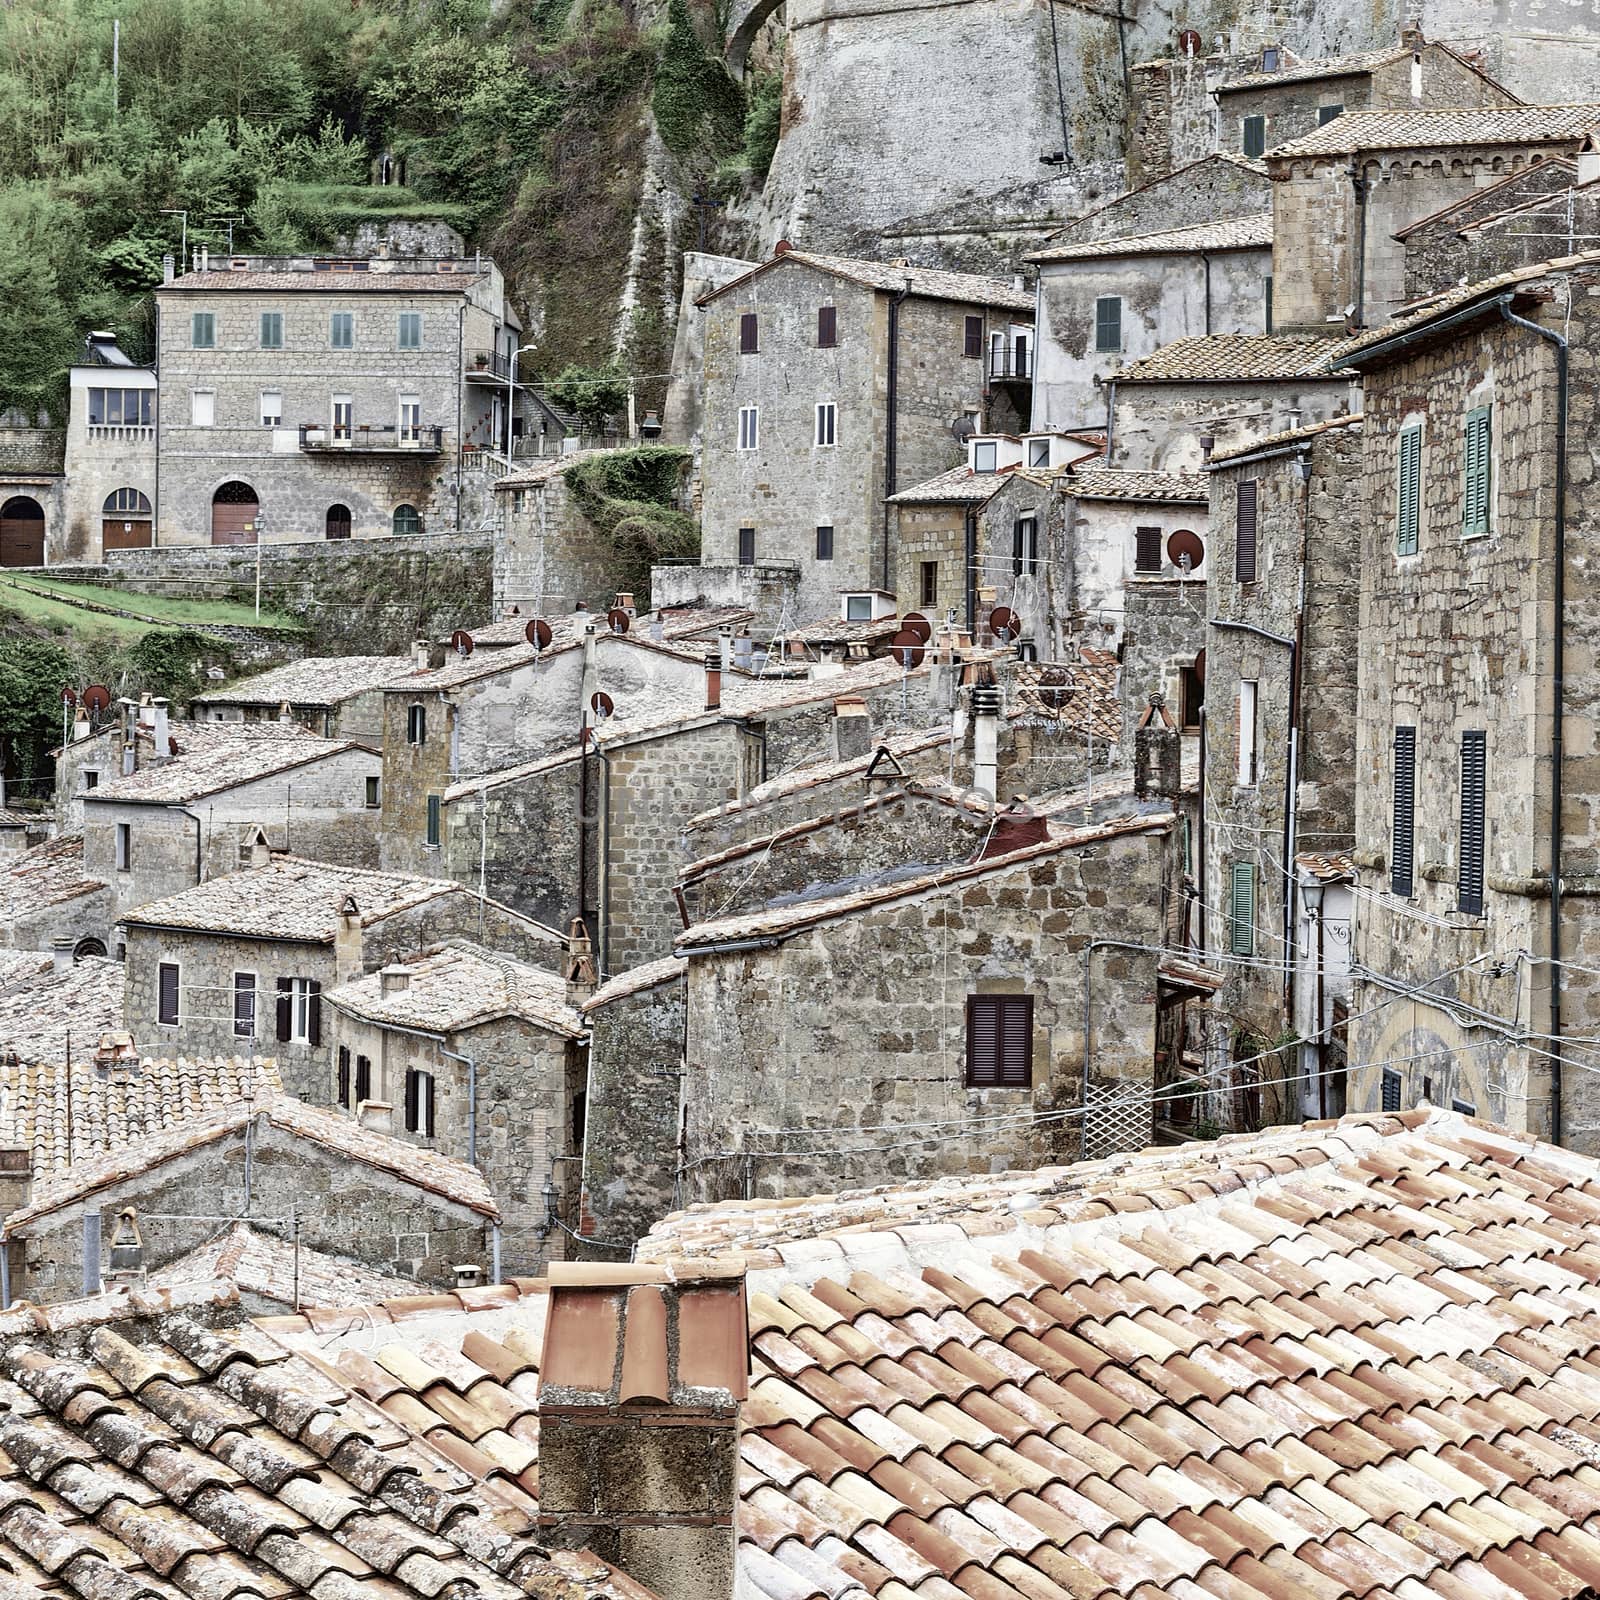 Aerial View on the Roofs of the City of Sorano in Italy, Vintage Style Toned Picture